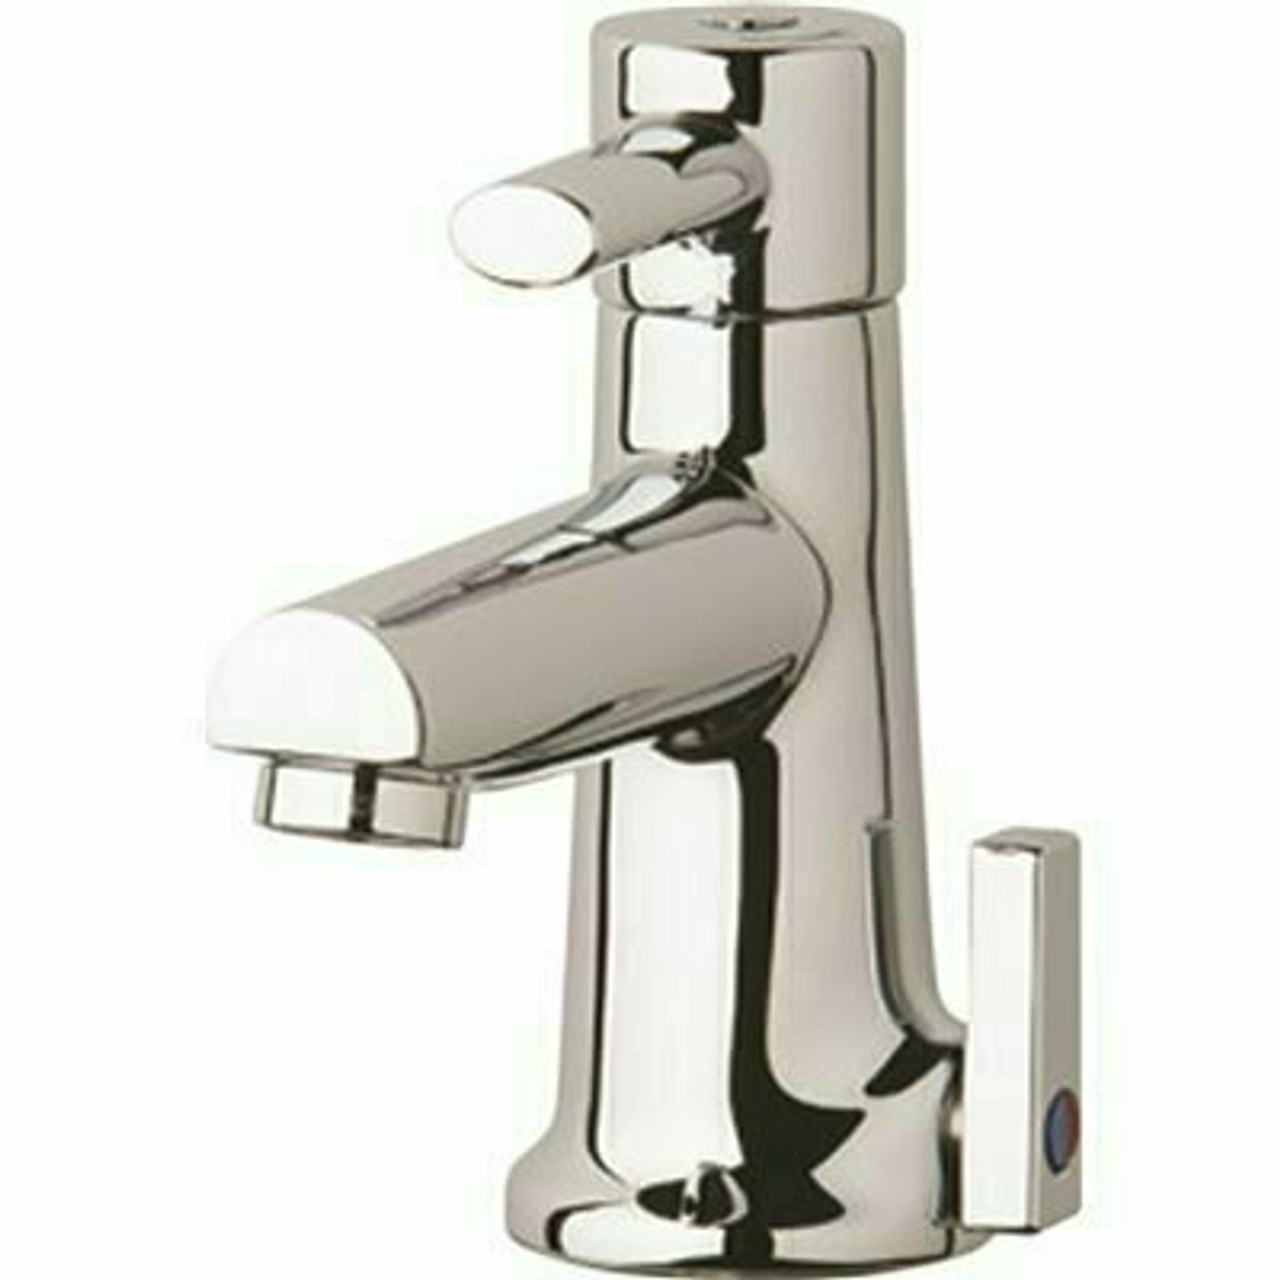 Single-Handle Deck-Mounted Hot/Cold Metering Mixing Faucet With Ceramic Cartridge 4 In. 0.5 Gpm In Chrome-Plated